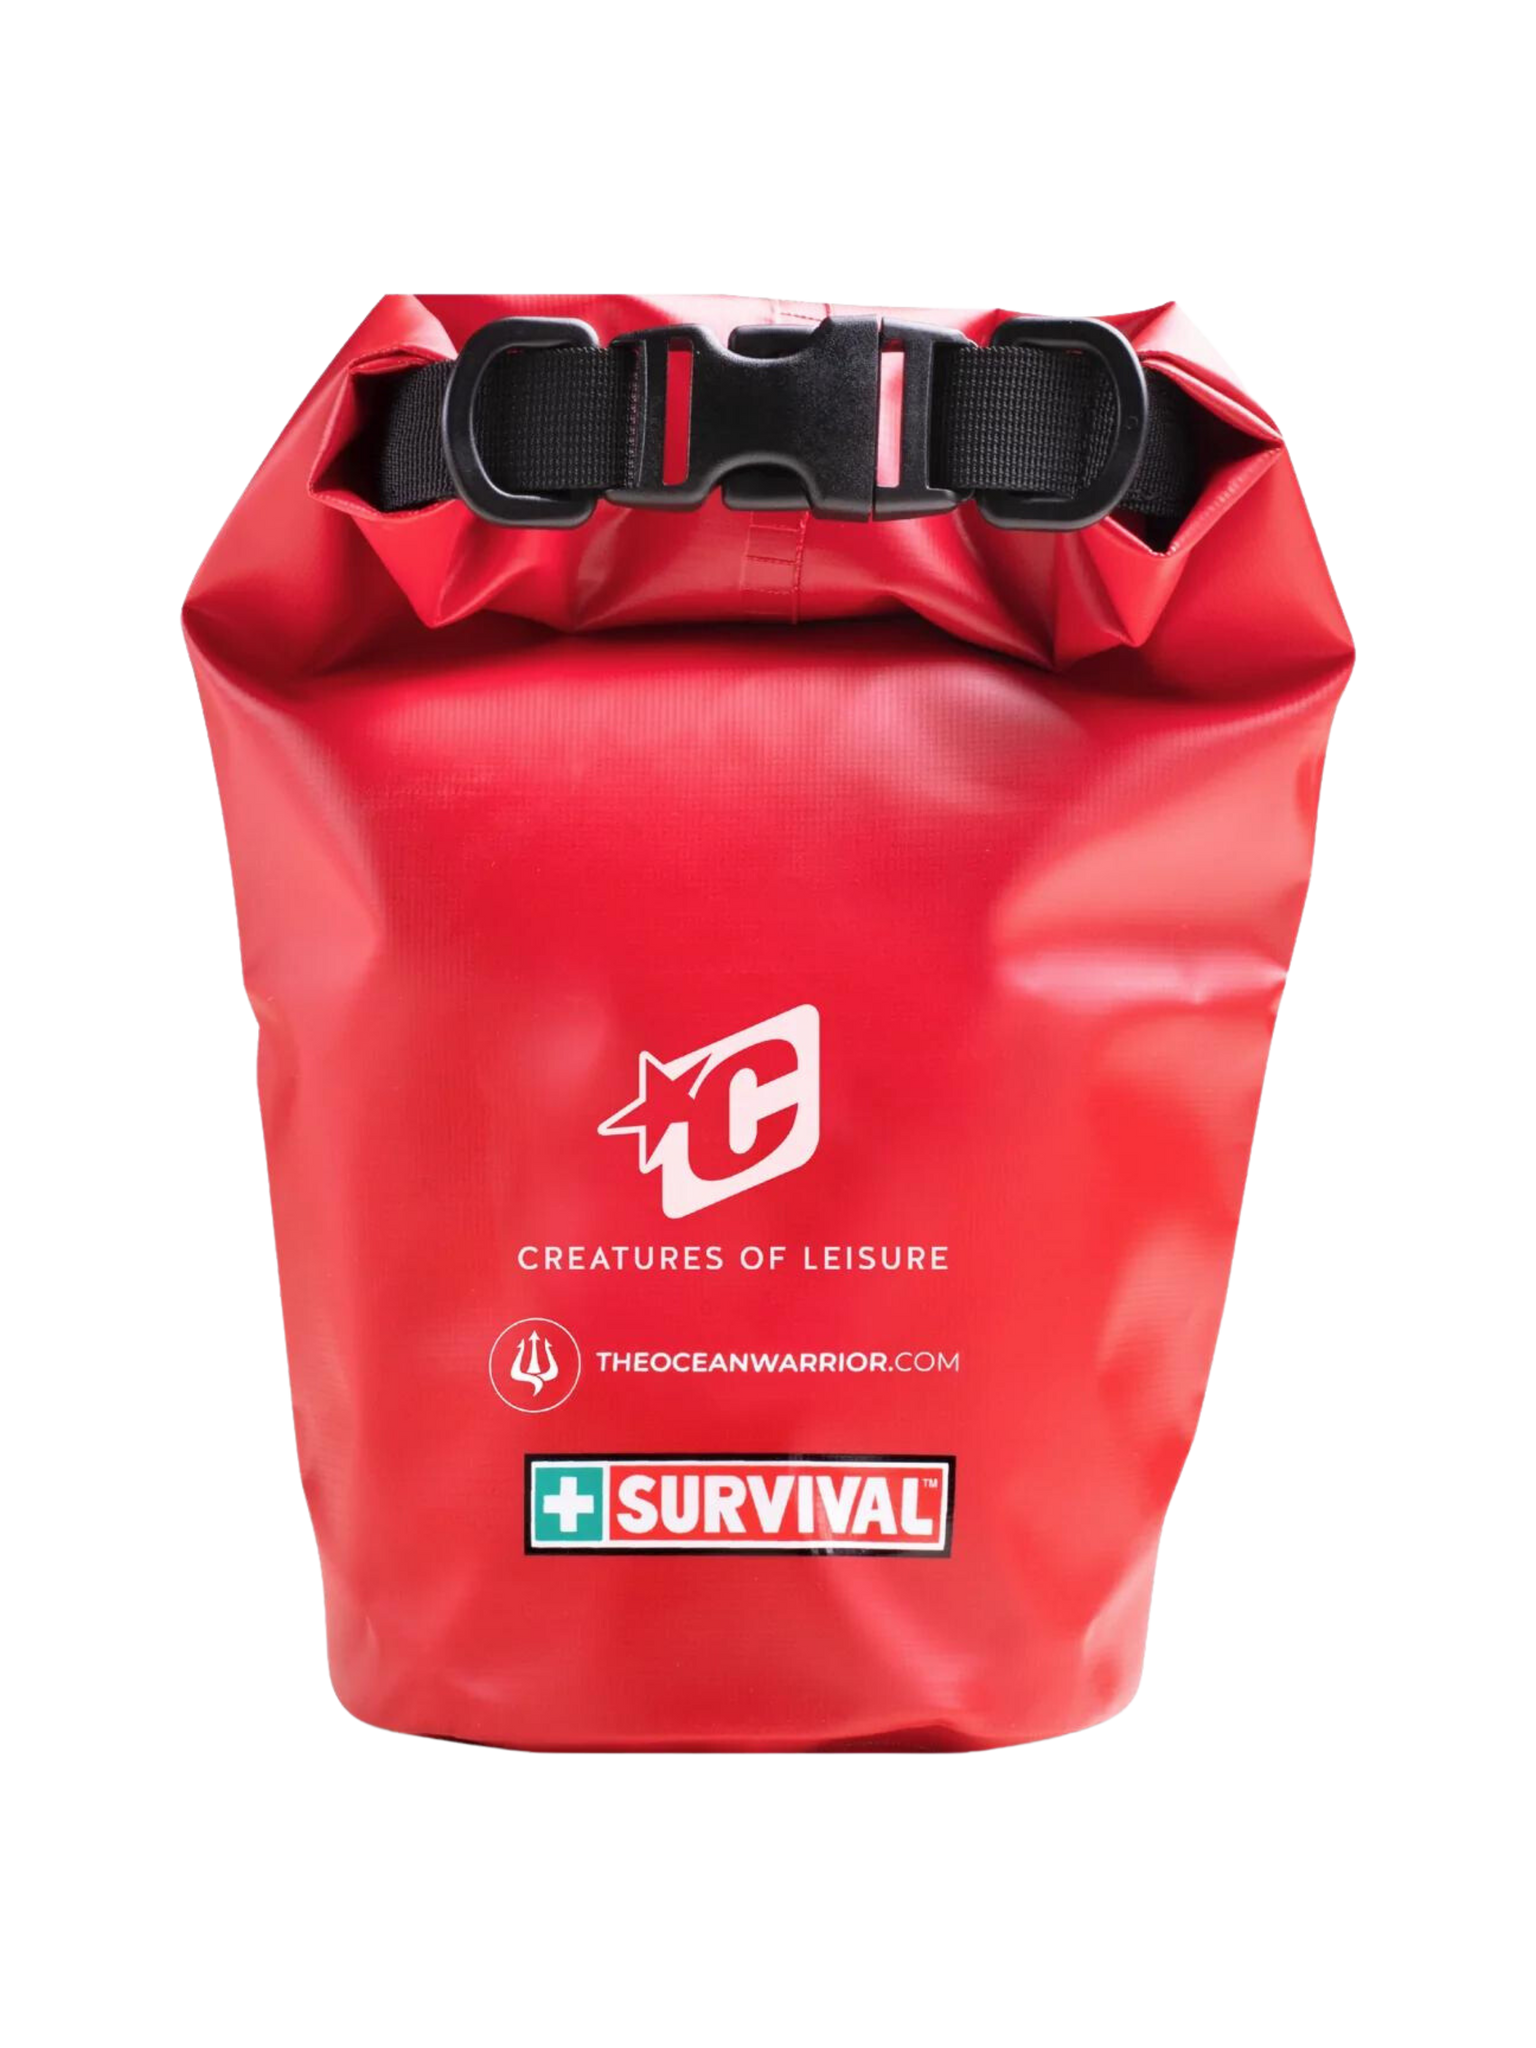 Creatures of Leisure Survival First Aid Kit - The Ocean Warrior